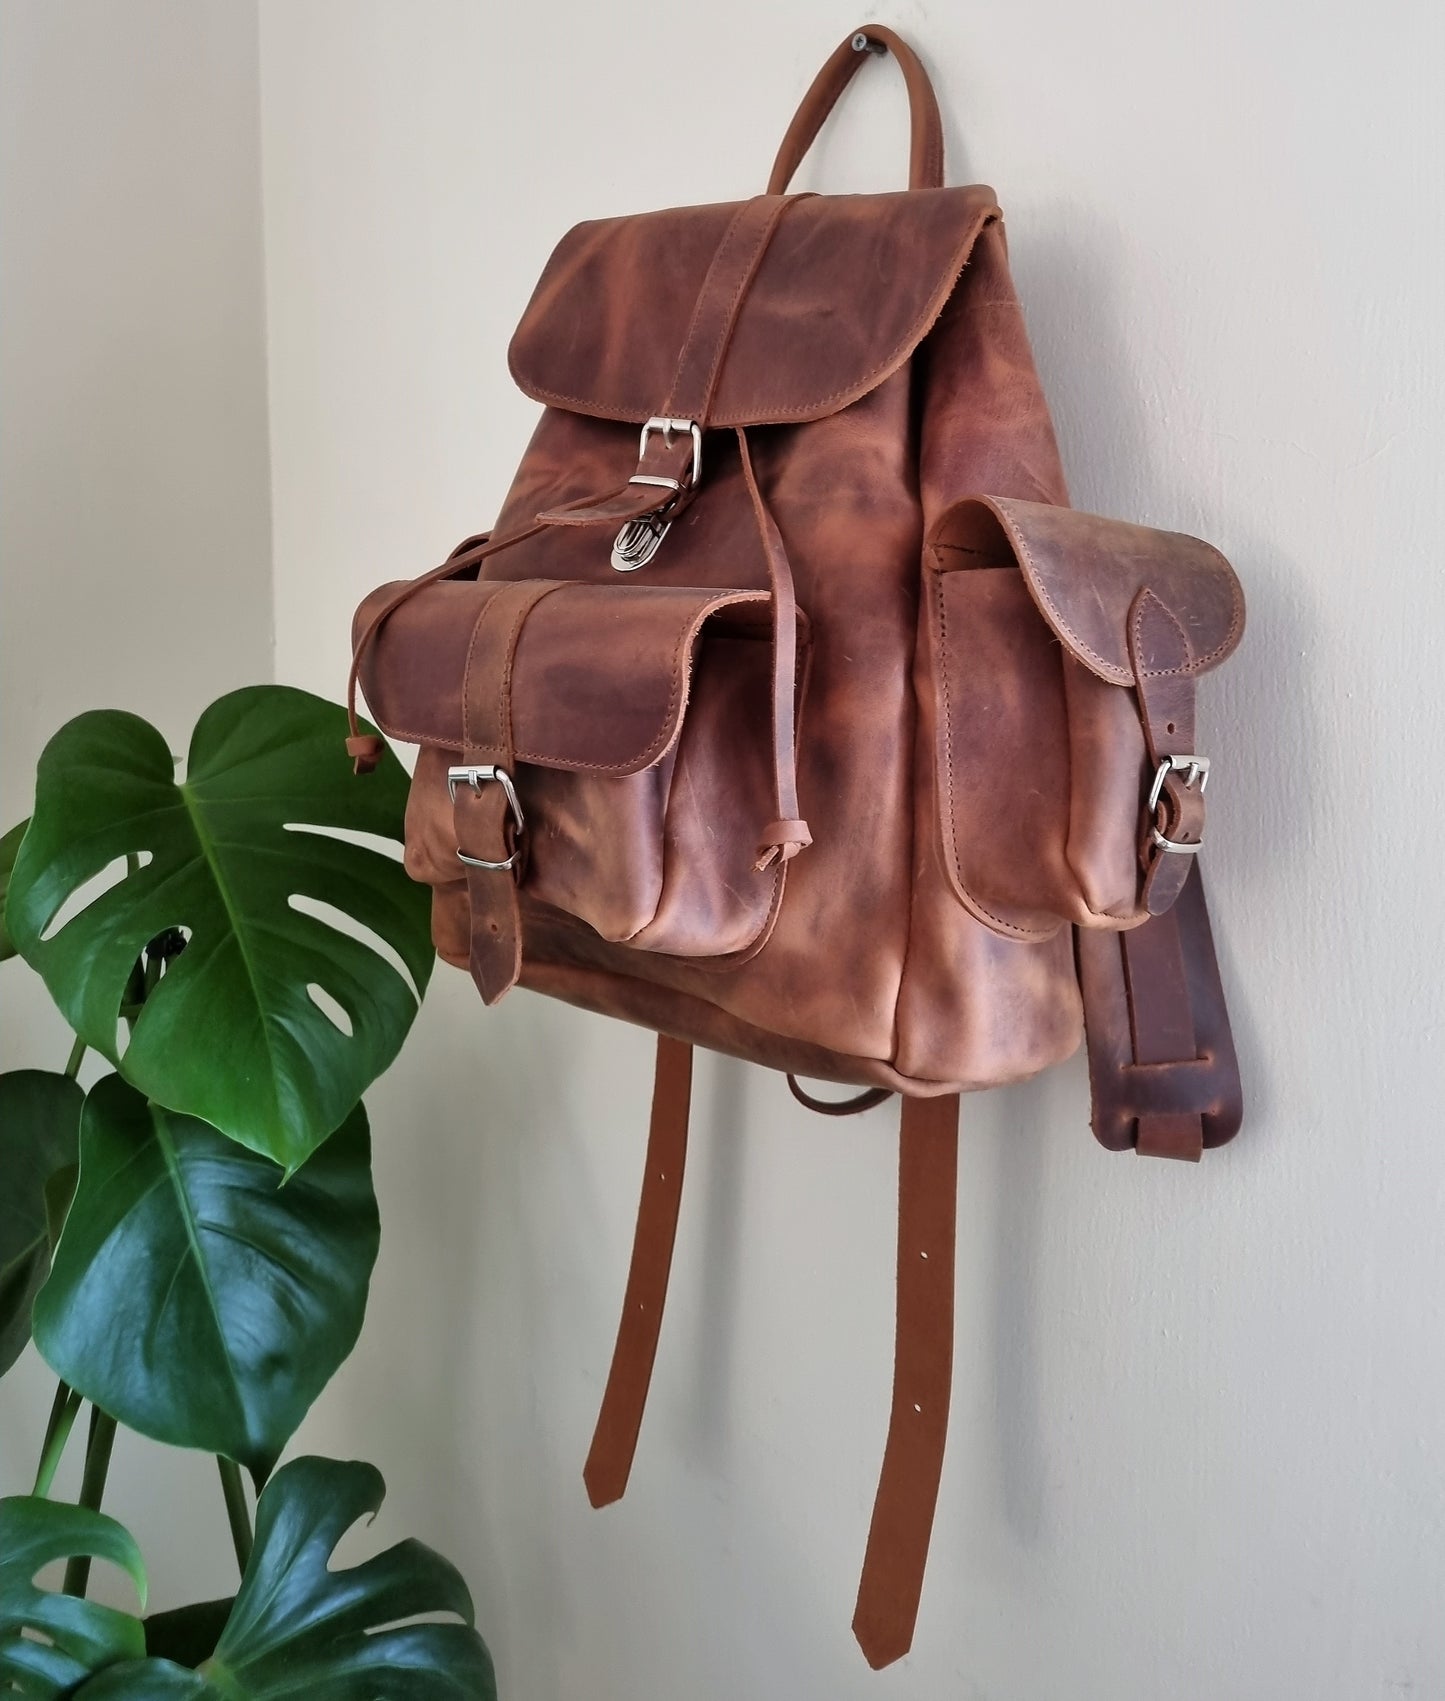 Back-bag in brown leather